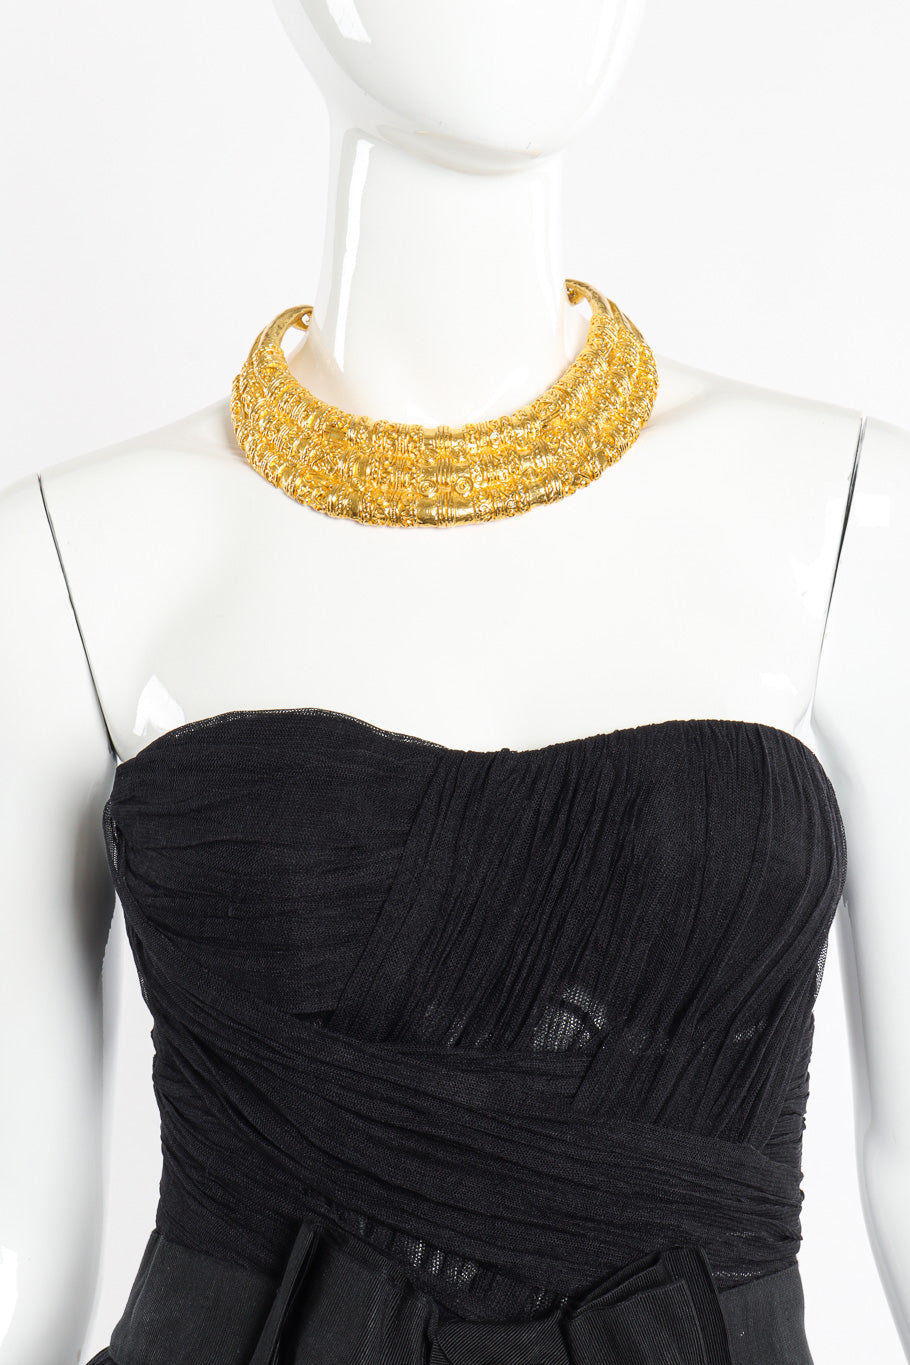 Etruscan Collar Plate Necklace II by Judith Leiber on mannequin with strapless black dress @recessla